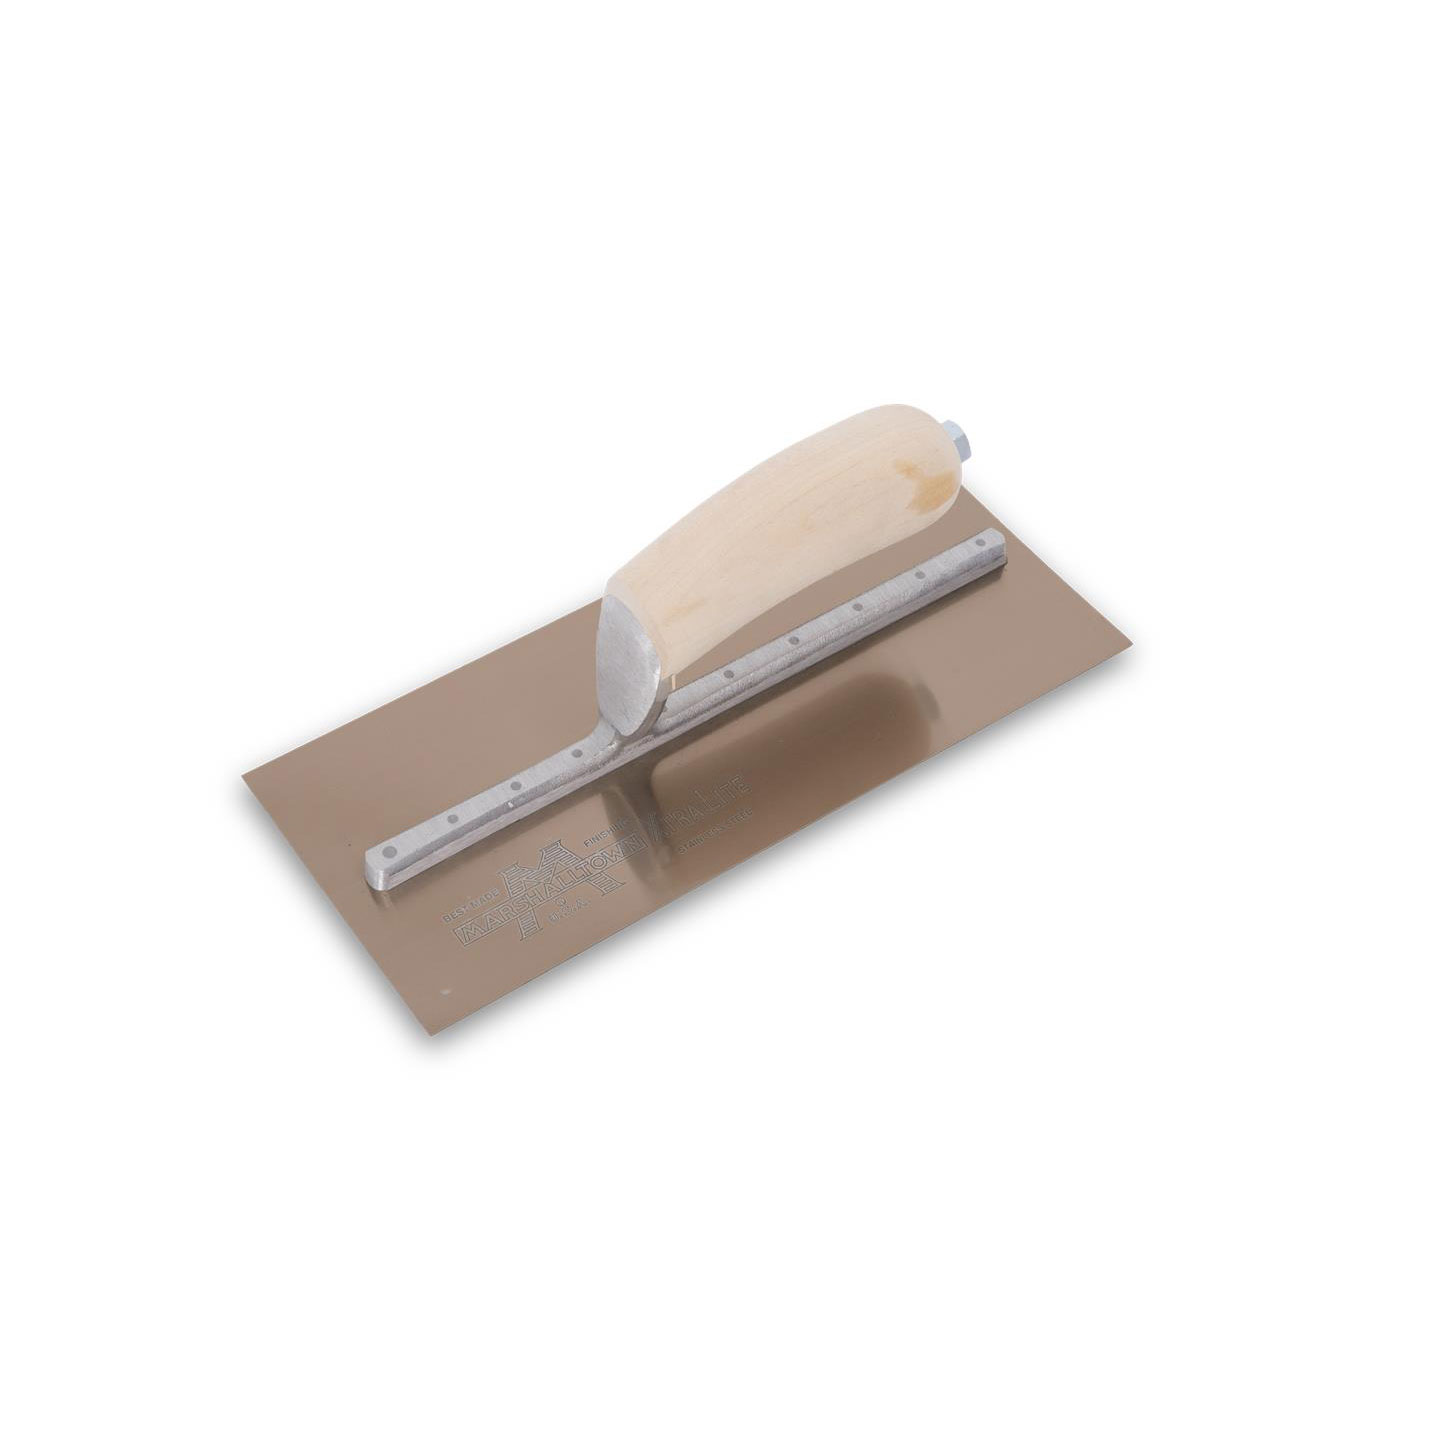 Marshalltown MXS2GS 11-1/2in x 4-1/2in Golden Stainless Finishing Trowel with Curved Wood Handle MXS2GS